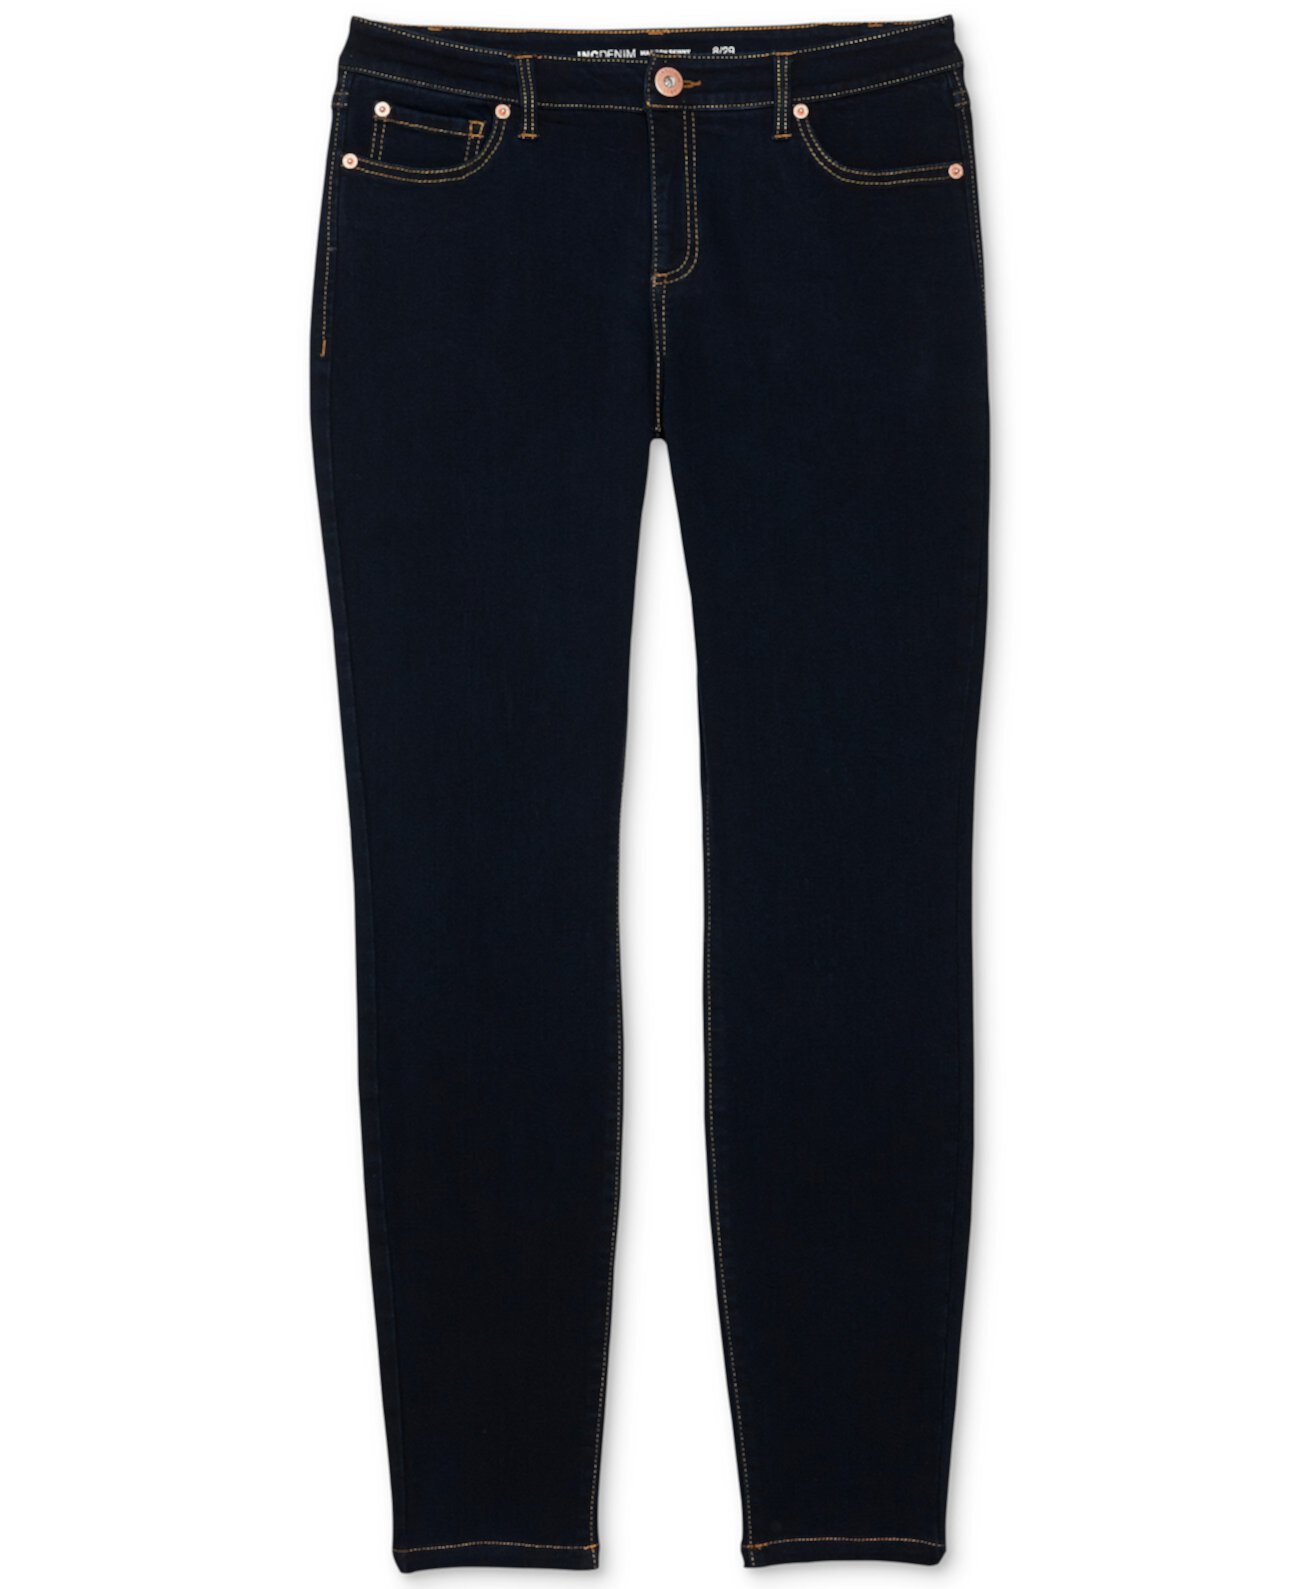 Women's Curvy Mid Rise Skinny Jeans, Created for Macy's I.N.C. International Concepts